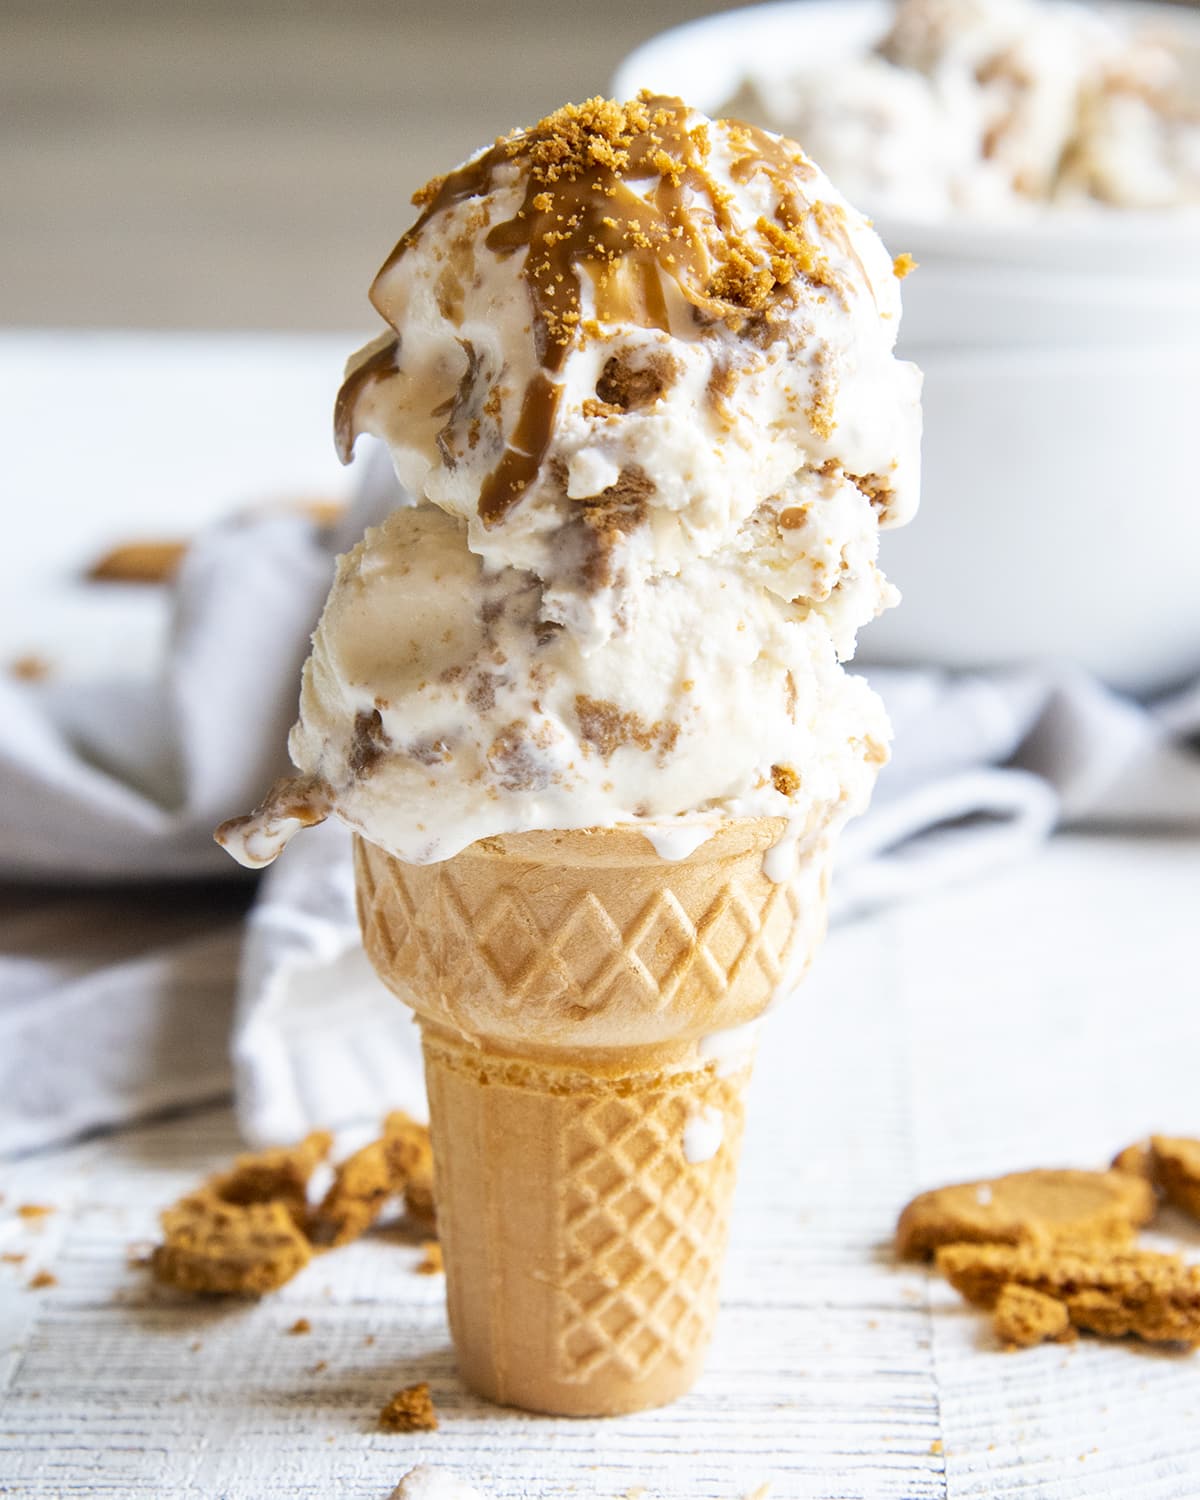 An ice cream cone topped with two scoops of Biscoff ice cream.